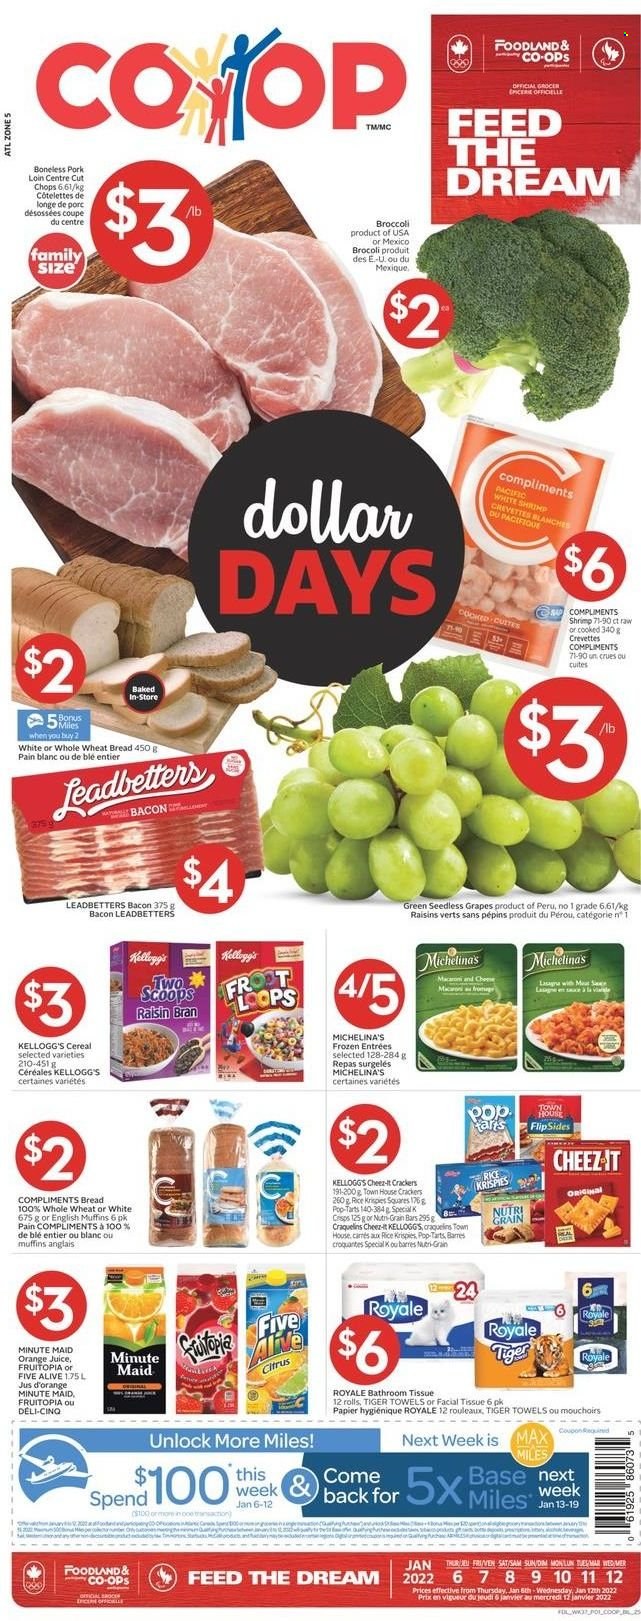 thumbnail - Co-op Flyer - January 06, 2022 - January 12, 2022 - Sales products - english muffins, wheat bread, broccoli, grapes, seedless grapes, macaroni, bacon, crackers, Kellogg's, Pop-Tarts, Cheez-It, cereals, Rice Krispies, Raisin Bran, Nutri-Grain, orange juice, juice, fruit punch, pork loin, pork meat. Page 1.